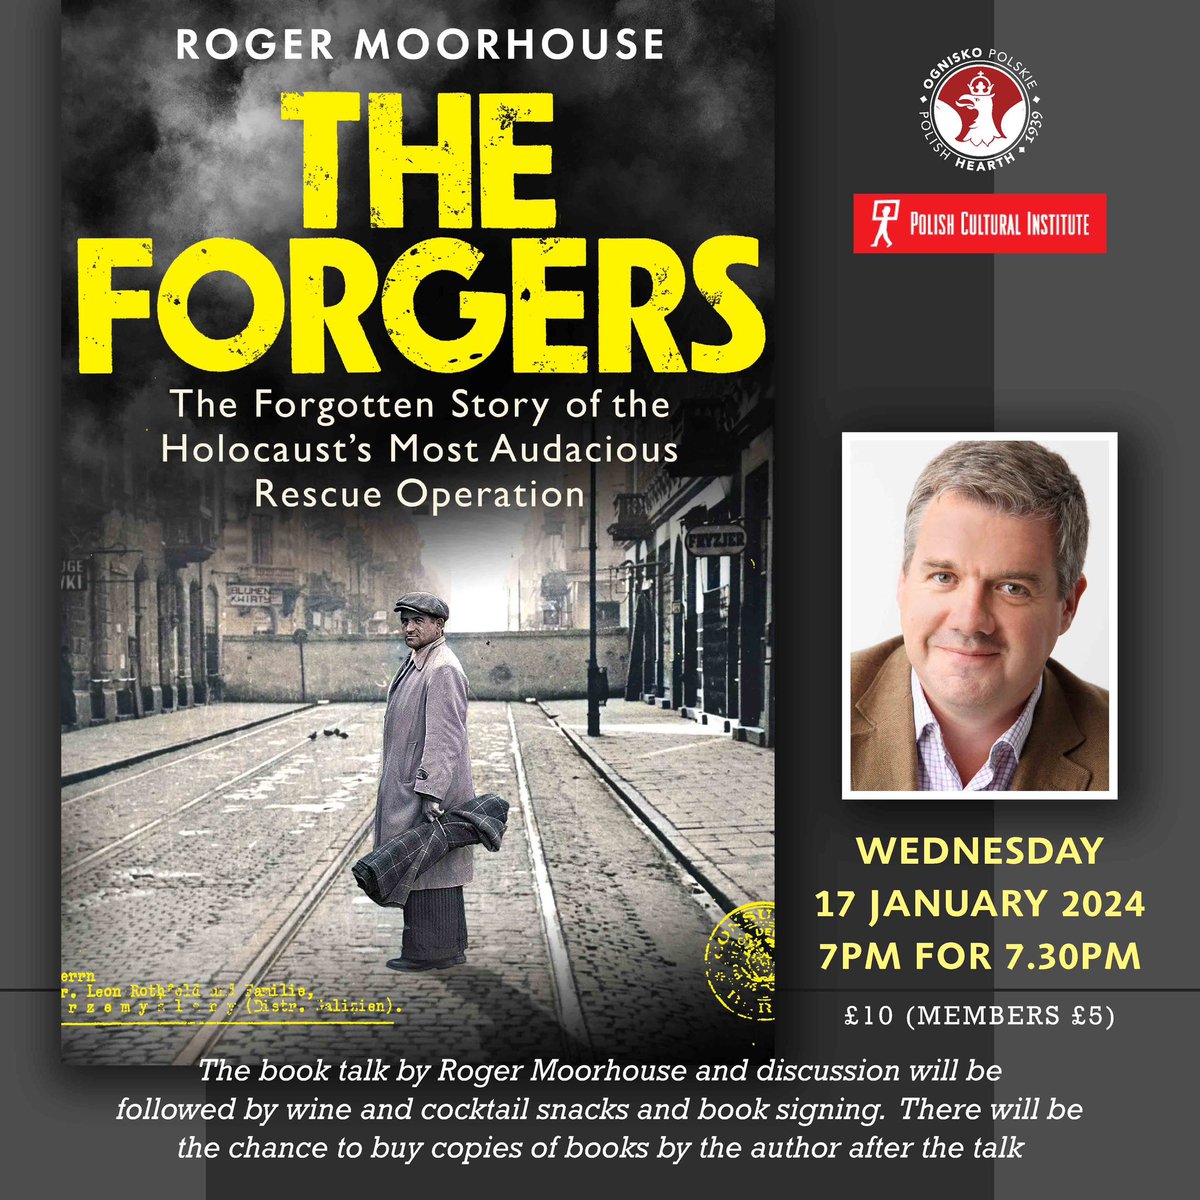 17.1.24: @Roger_Moorhouse presents his most recent book - The Forgers: The Forgotten Story of the Holocaust’s Most Audacious Rescue Operation Book sales from @nomadbooks 🎟️👇 ogniskopolskie.org.uk/events/roger-m…’s-most-audacious-rescue-operation.aspx